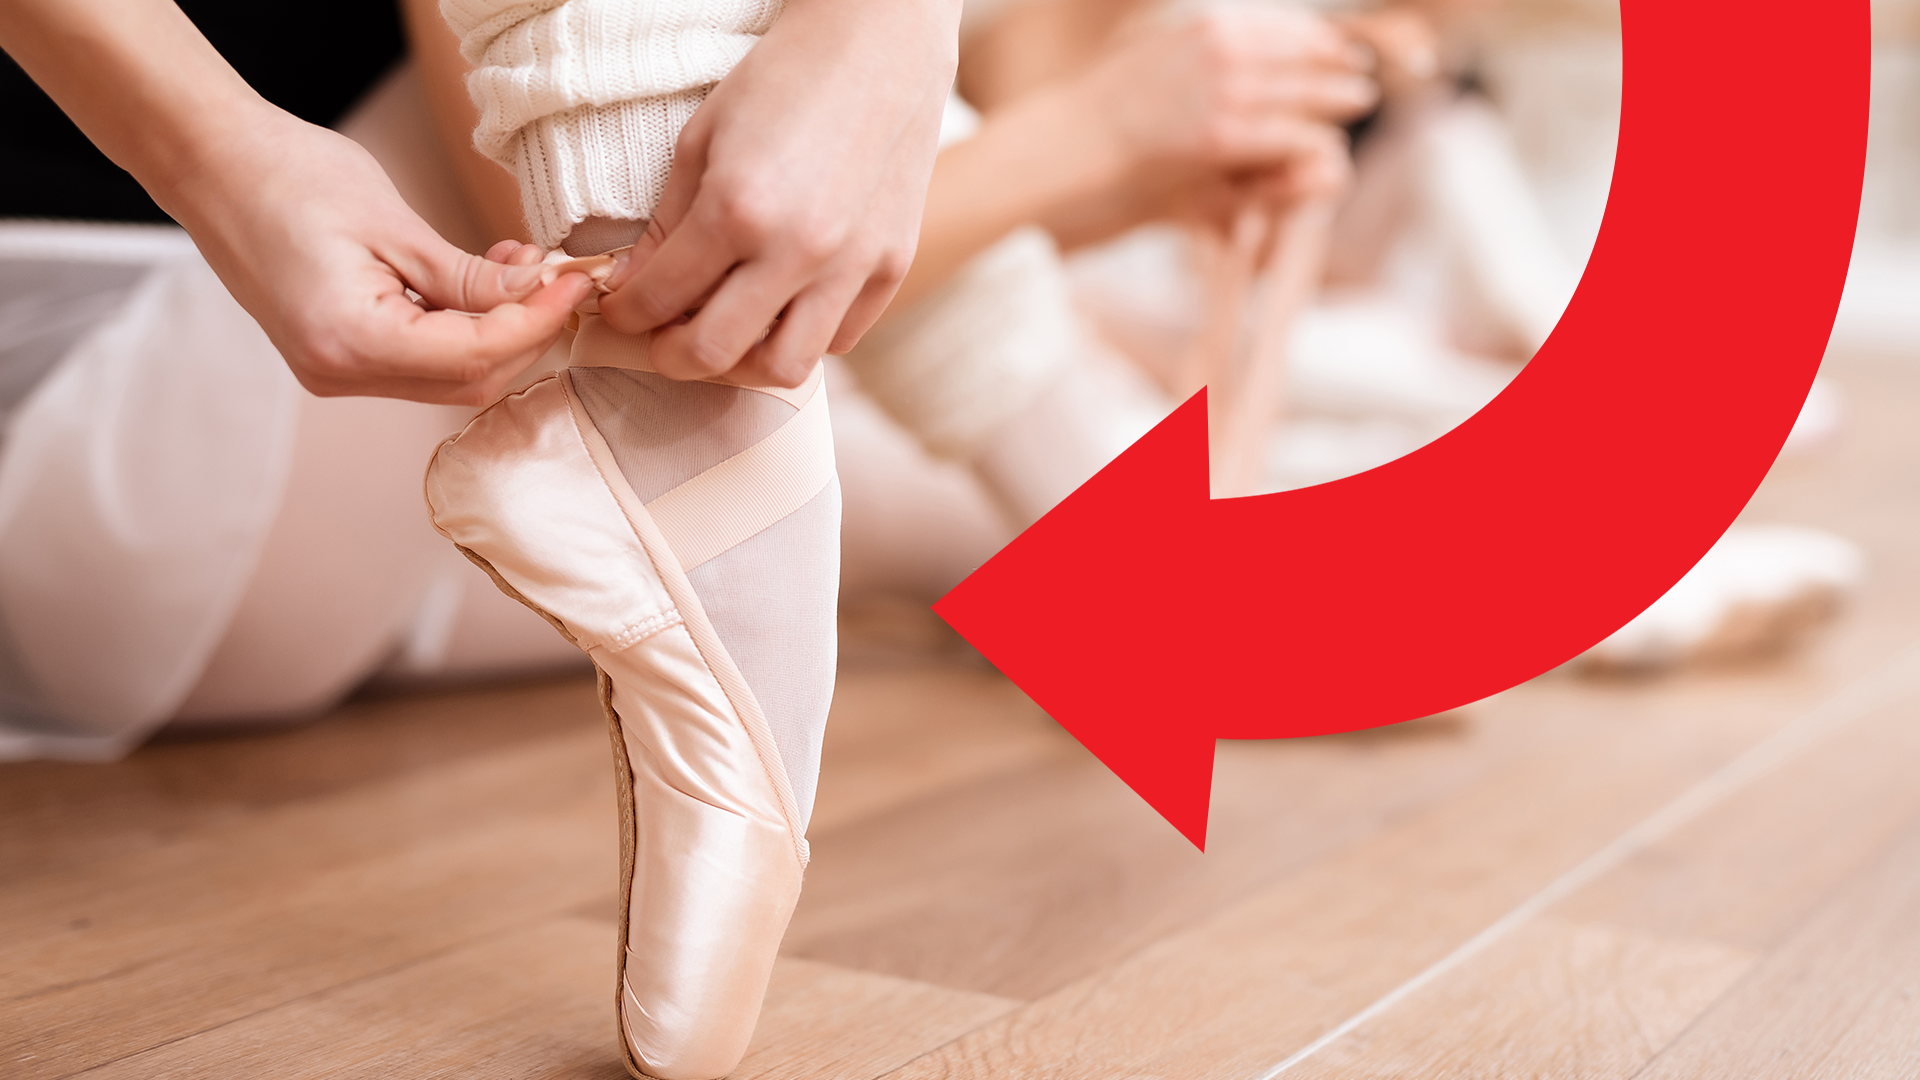 Ballerina doing up shoes with red arrow